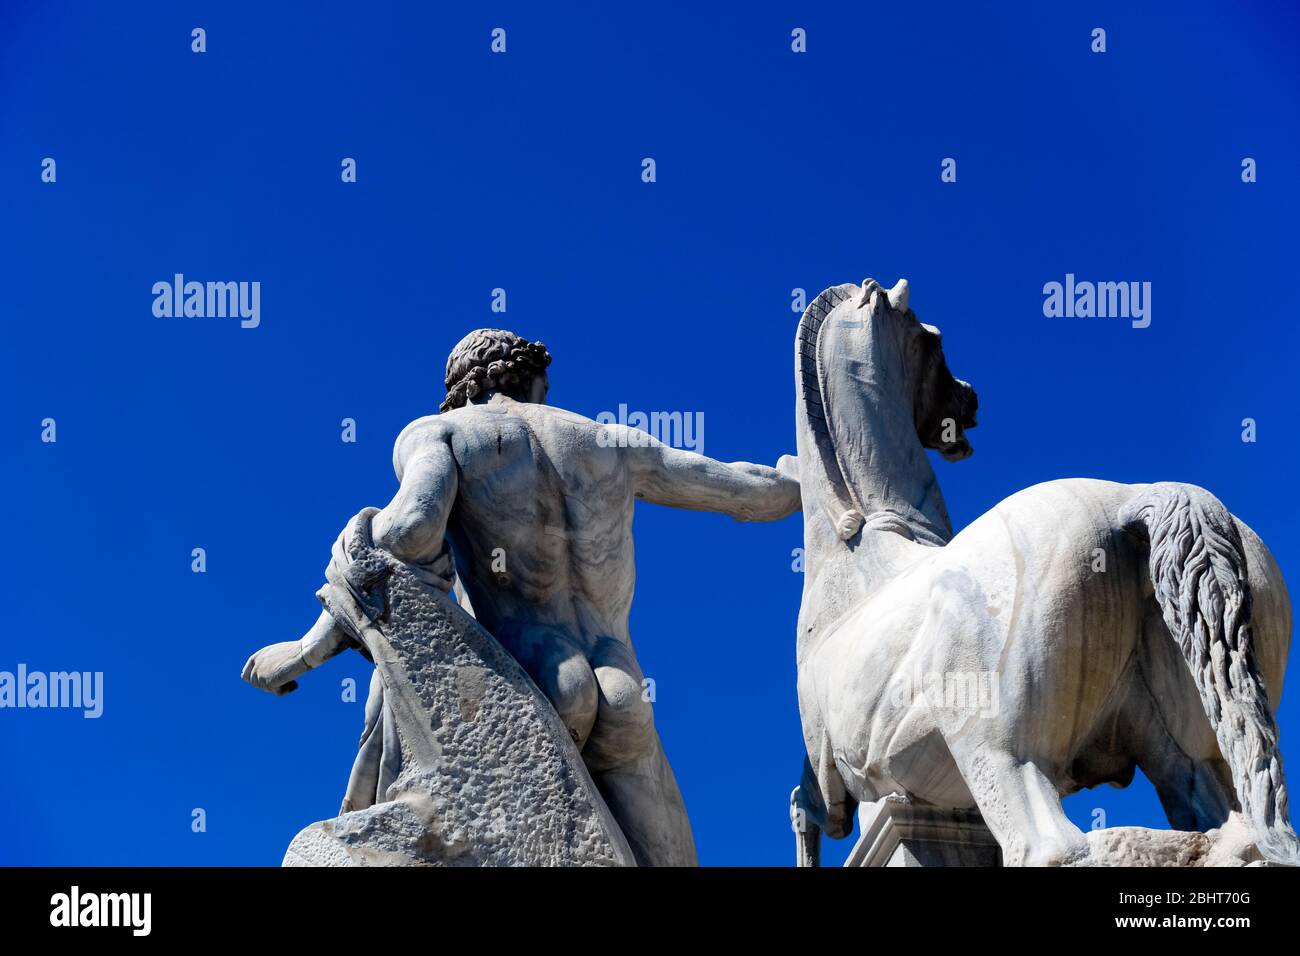 Dioscurus fountain detail: Dioscurus statue and horse. Quirinal Square. Italian Republic. Rome, Italy, Europe. Cloudless clear blue sky, copy space. Stock Photo